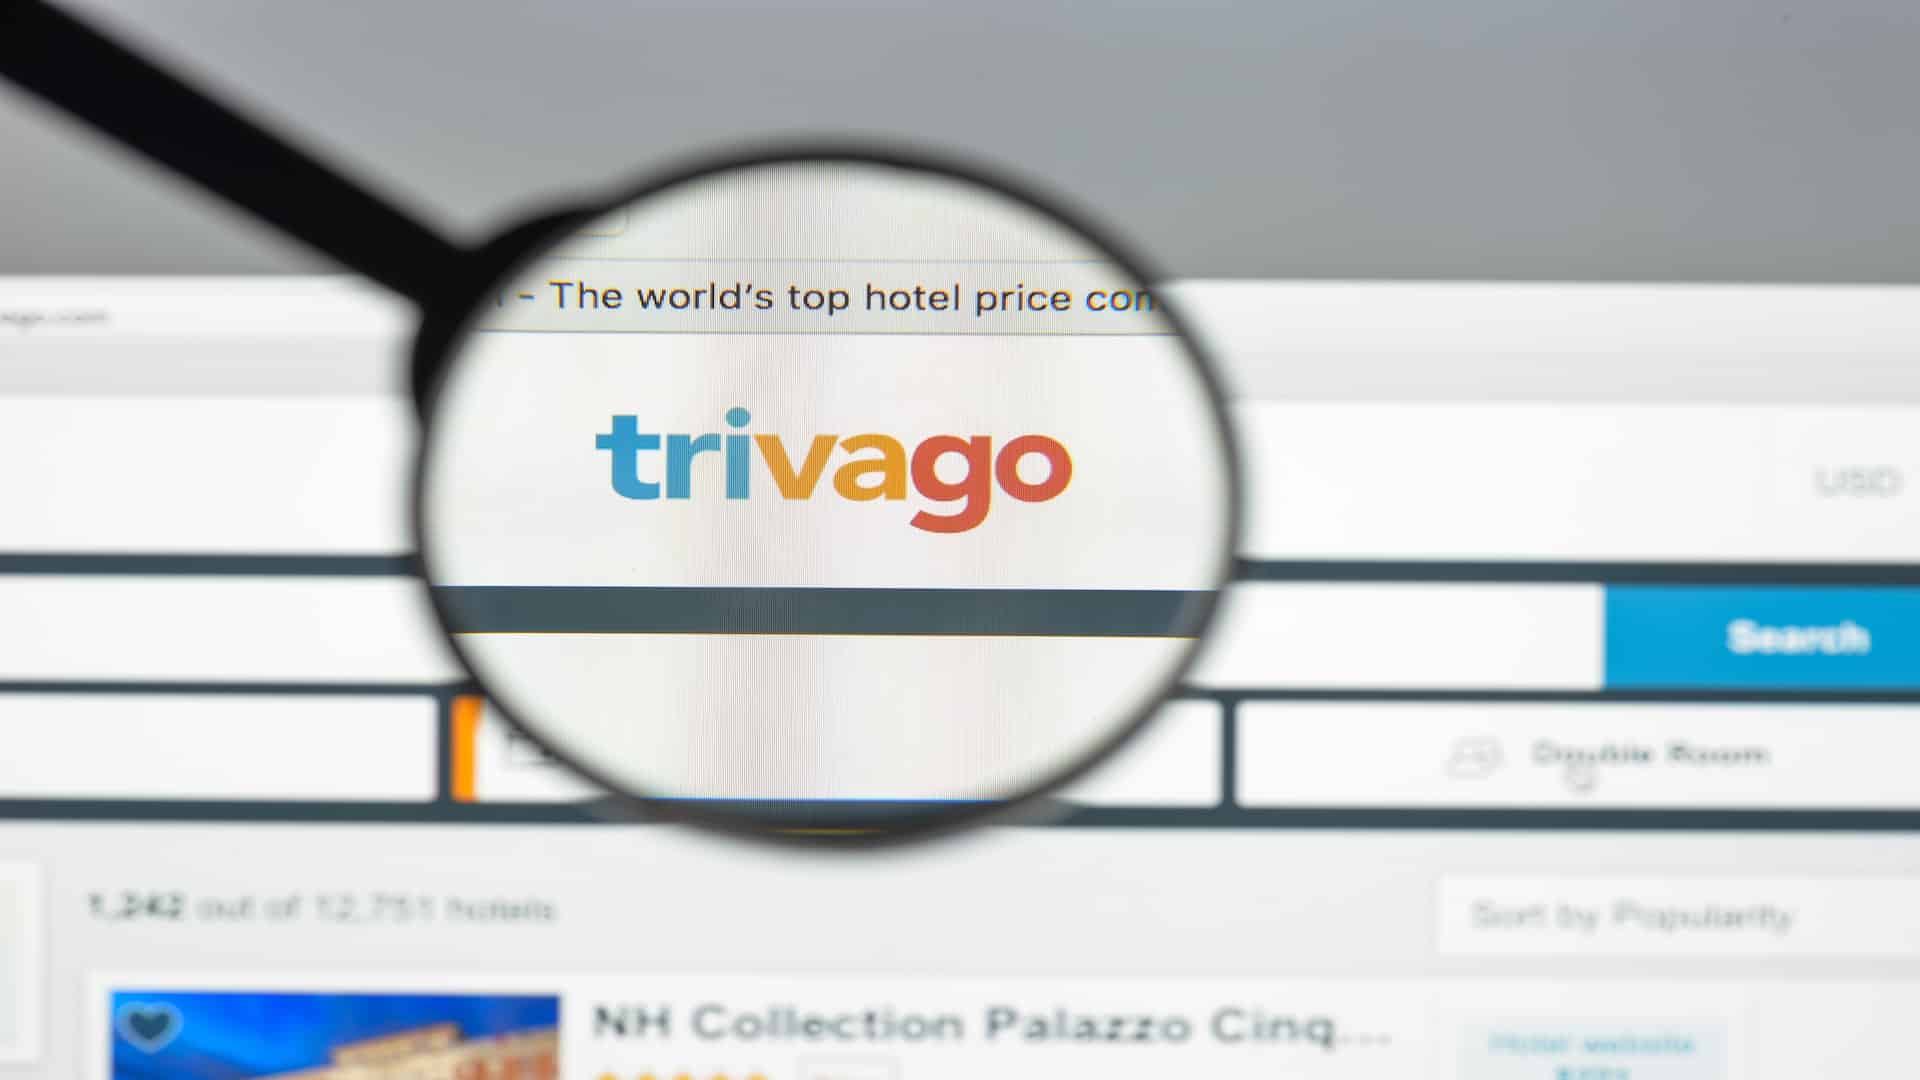 Trivago blames profit drop on opting out of new Google Ads product